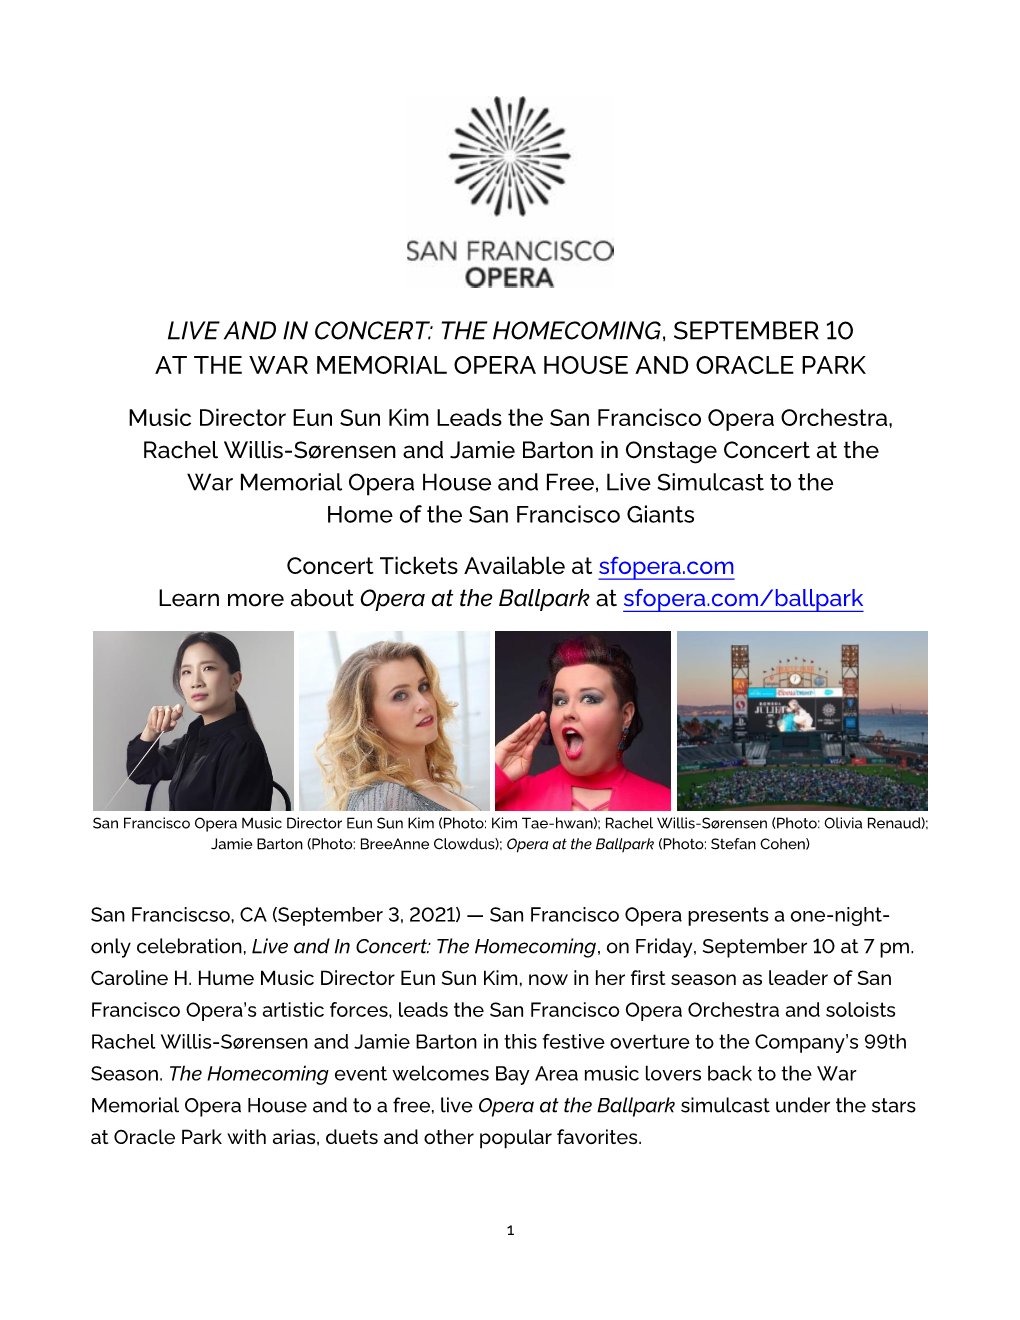 Live and in Concert: the Homecoming, September 10 at the War Memorial Opera House and Oracle Park